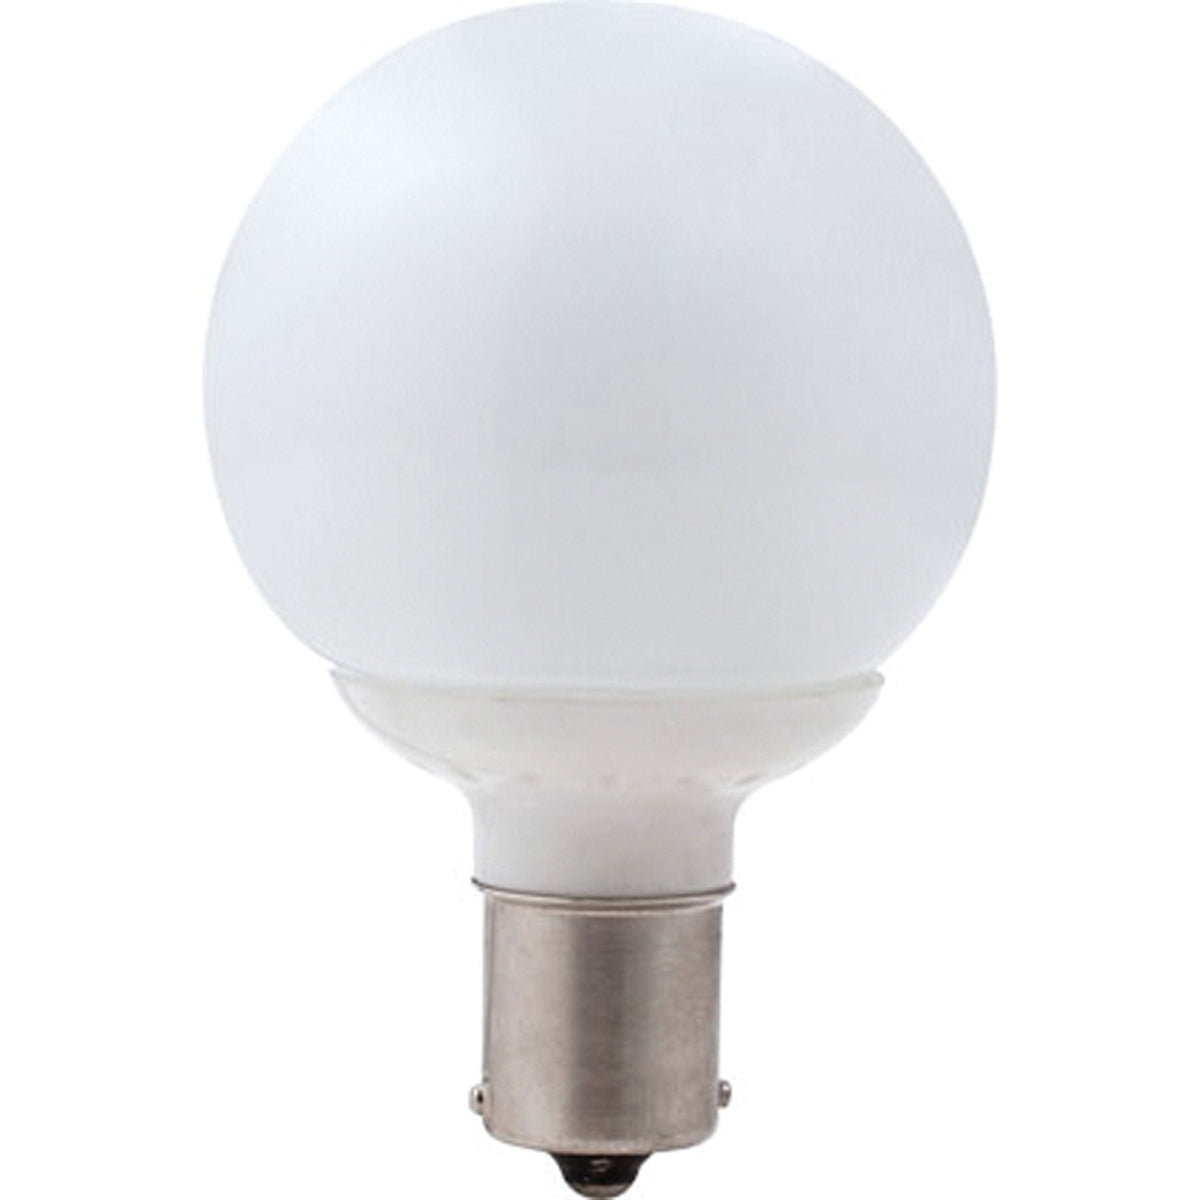 Ming's Mark Qualifies for Free Shipping Ming's Mark Green LongLife Single Dome Light with 1156 Base Bulb #9090104